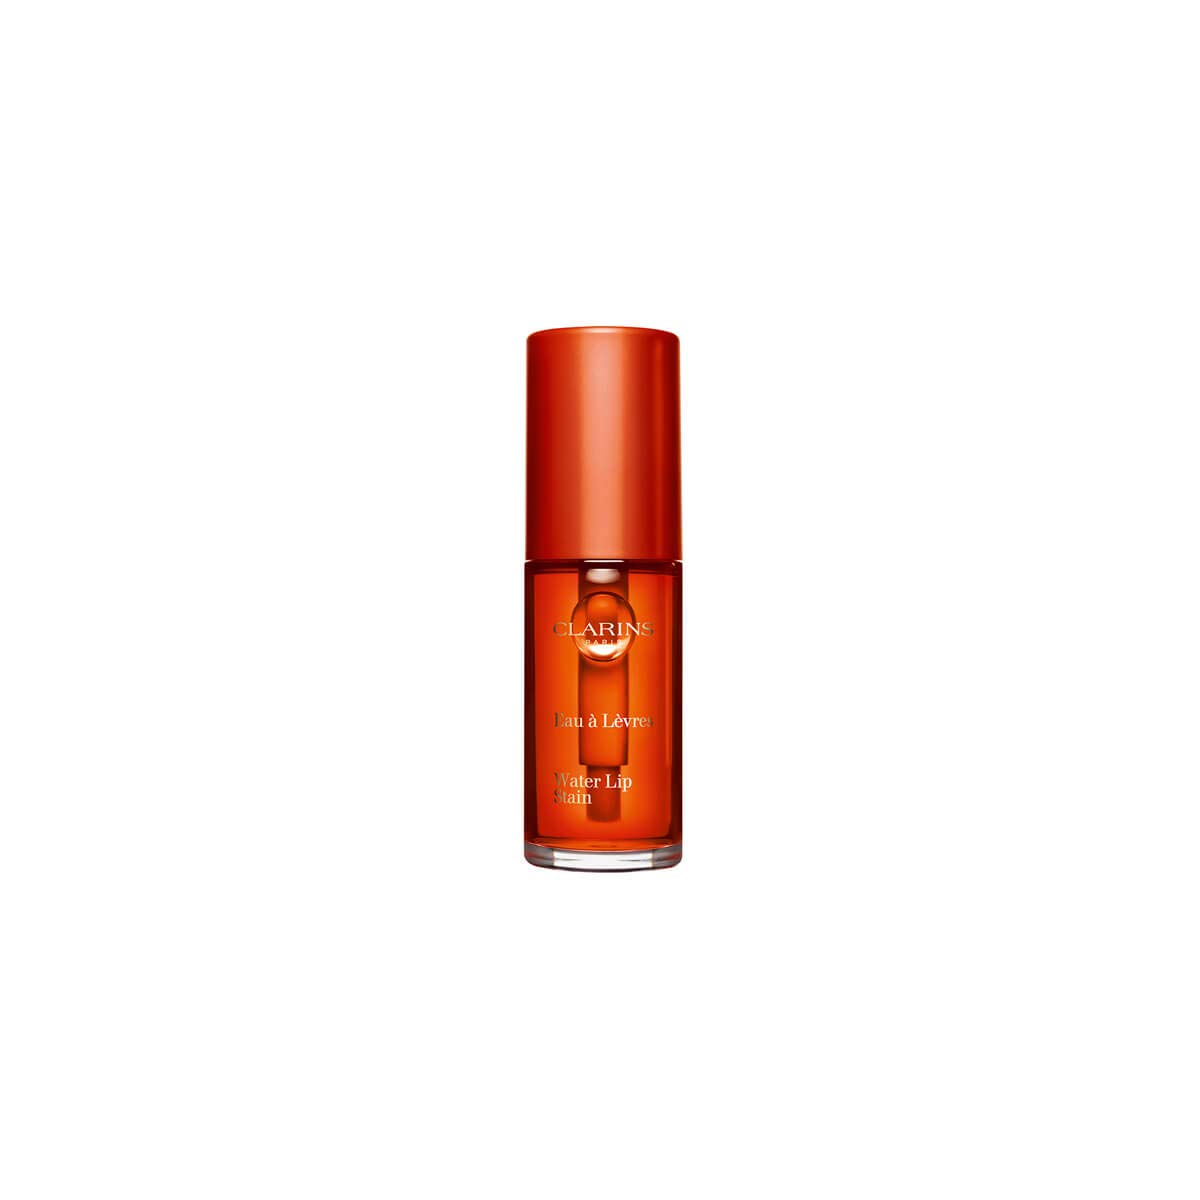 Clarins Water Lip Stain | Matte Finish | Moisturizing and Softening | Buildable, Transfer-Proof, Mask-Proof, Lightweight and Long-Wearing